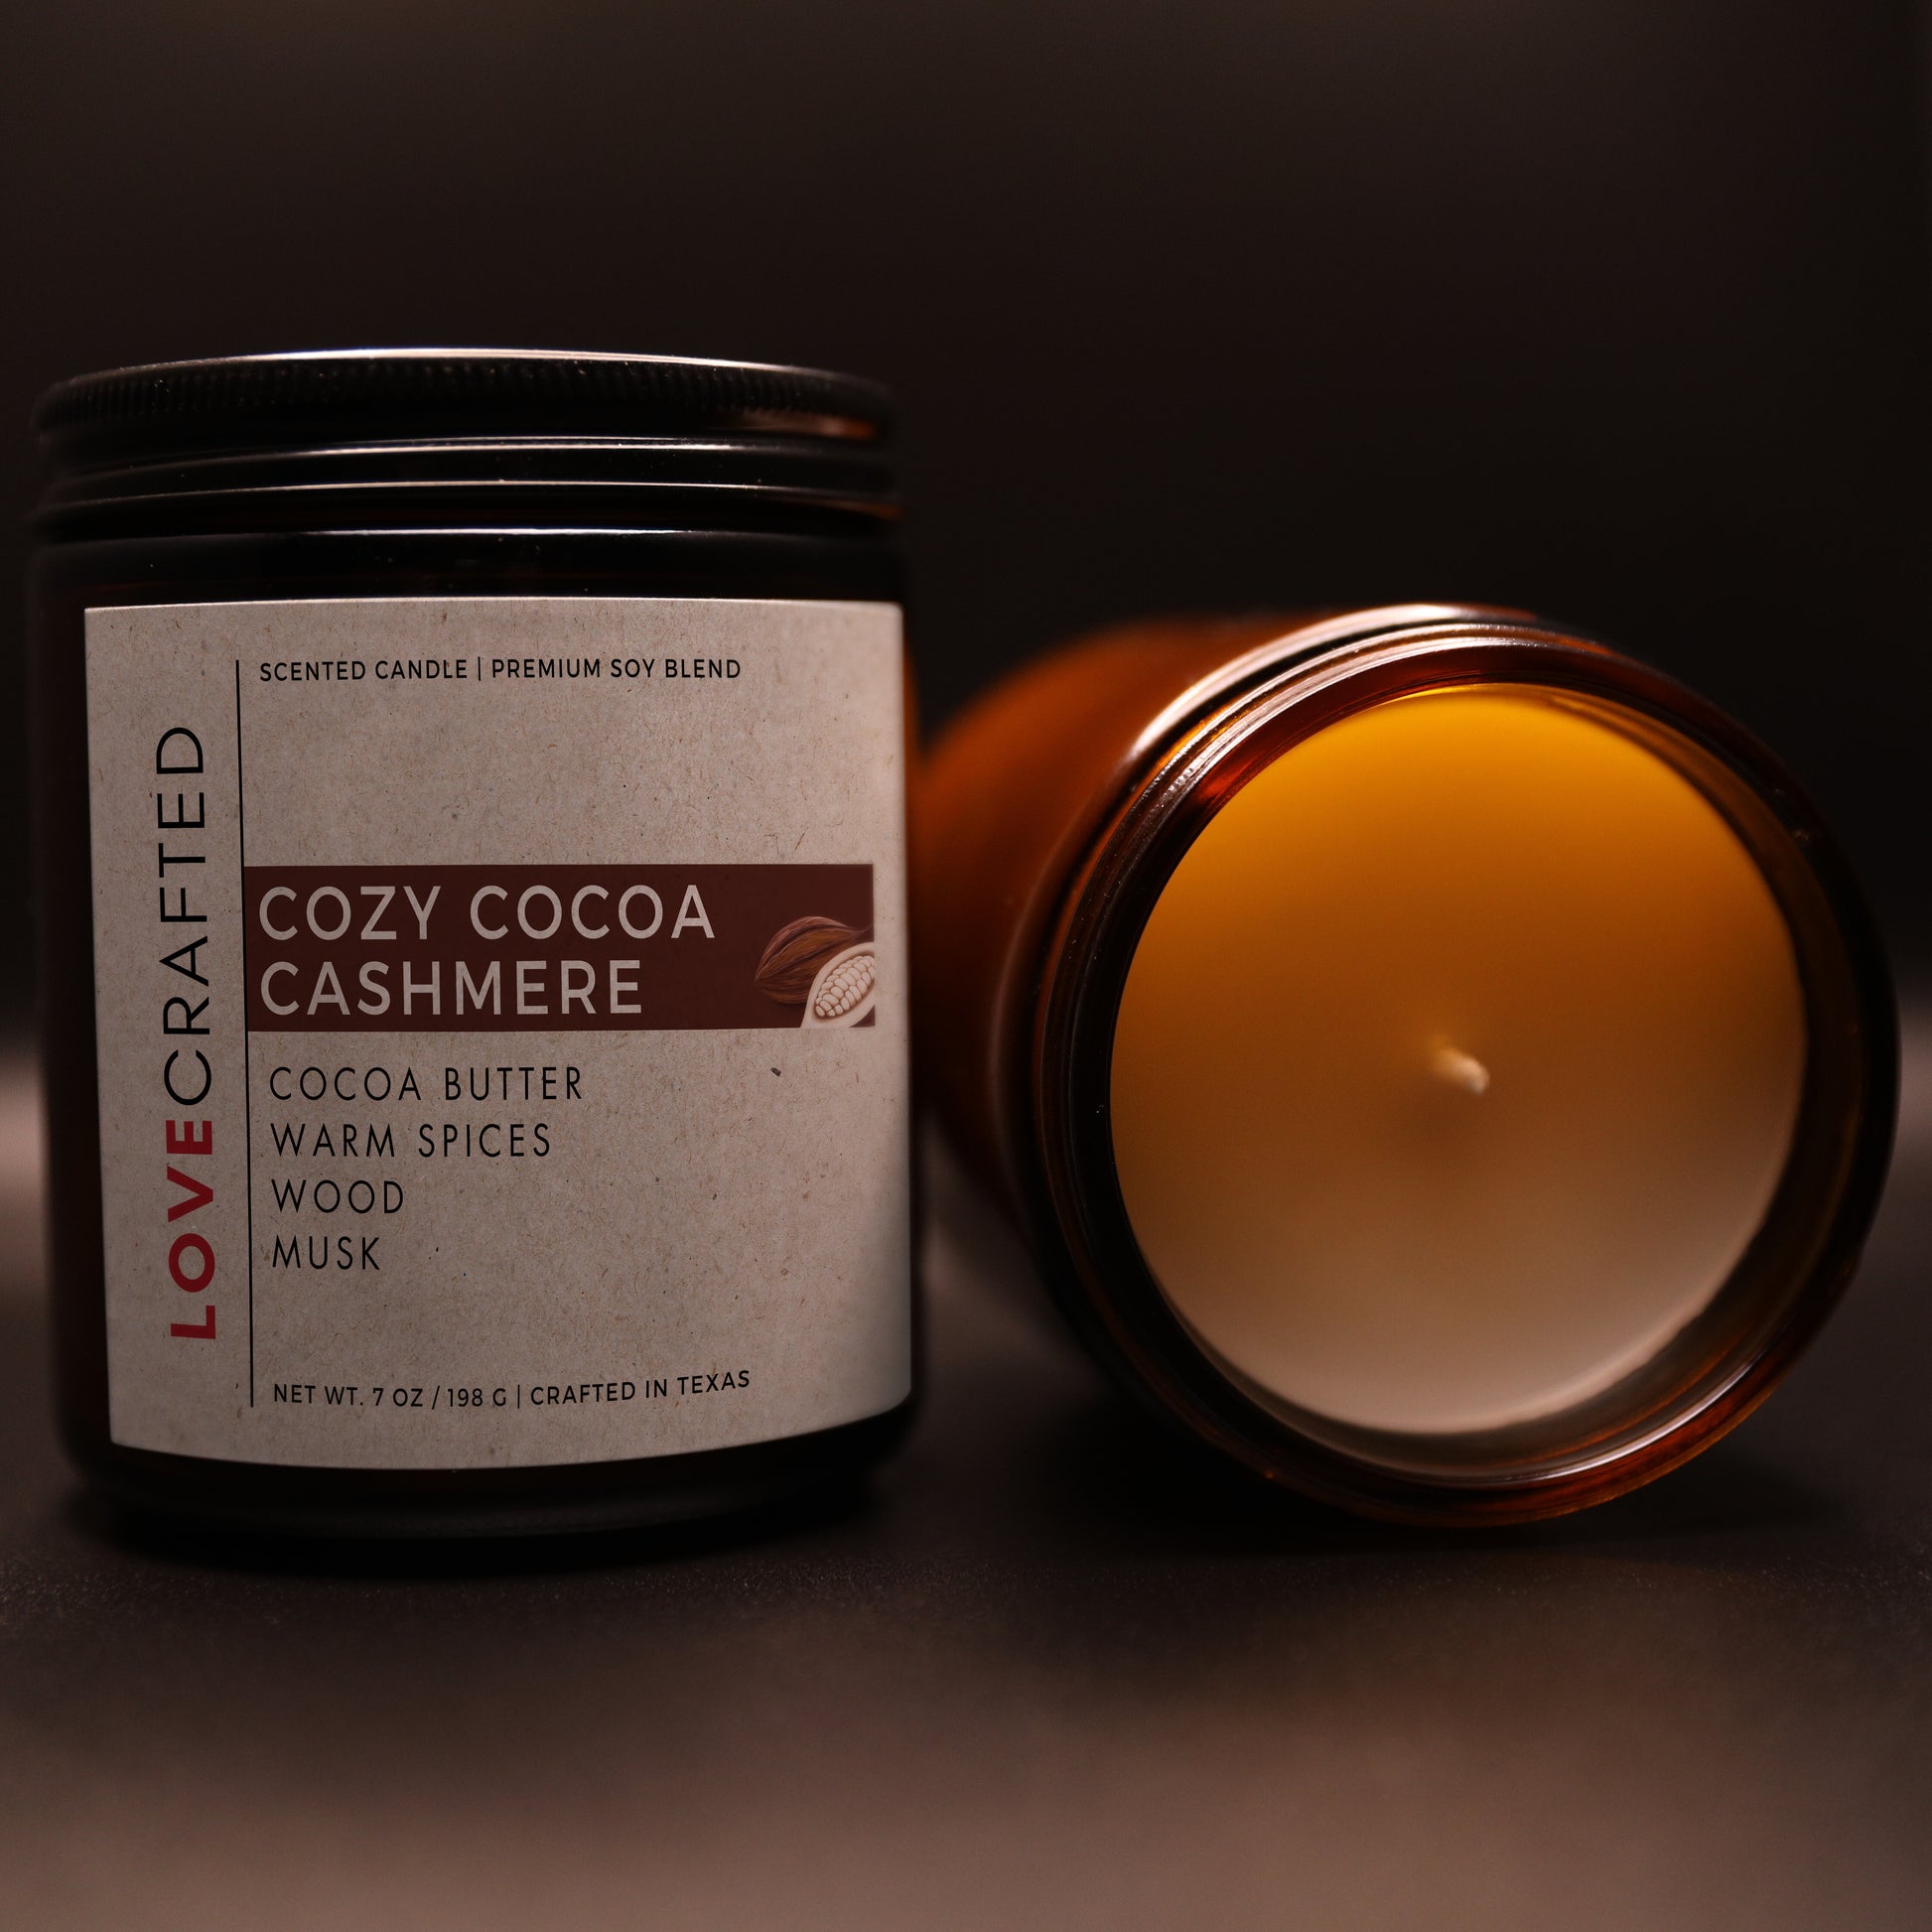 Cozy Cocoa Cashmere, a Fresh and Clean Musky Lovecrafted Candle